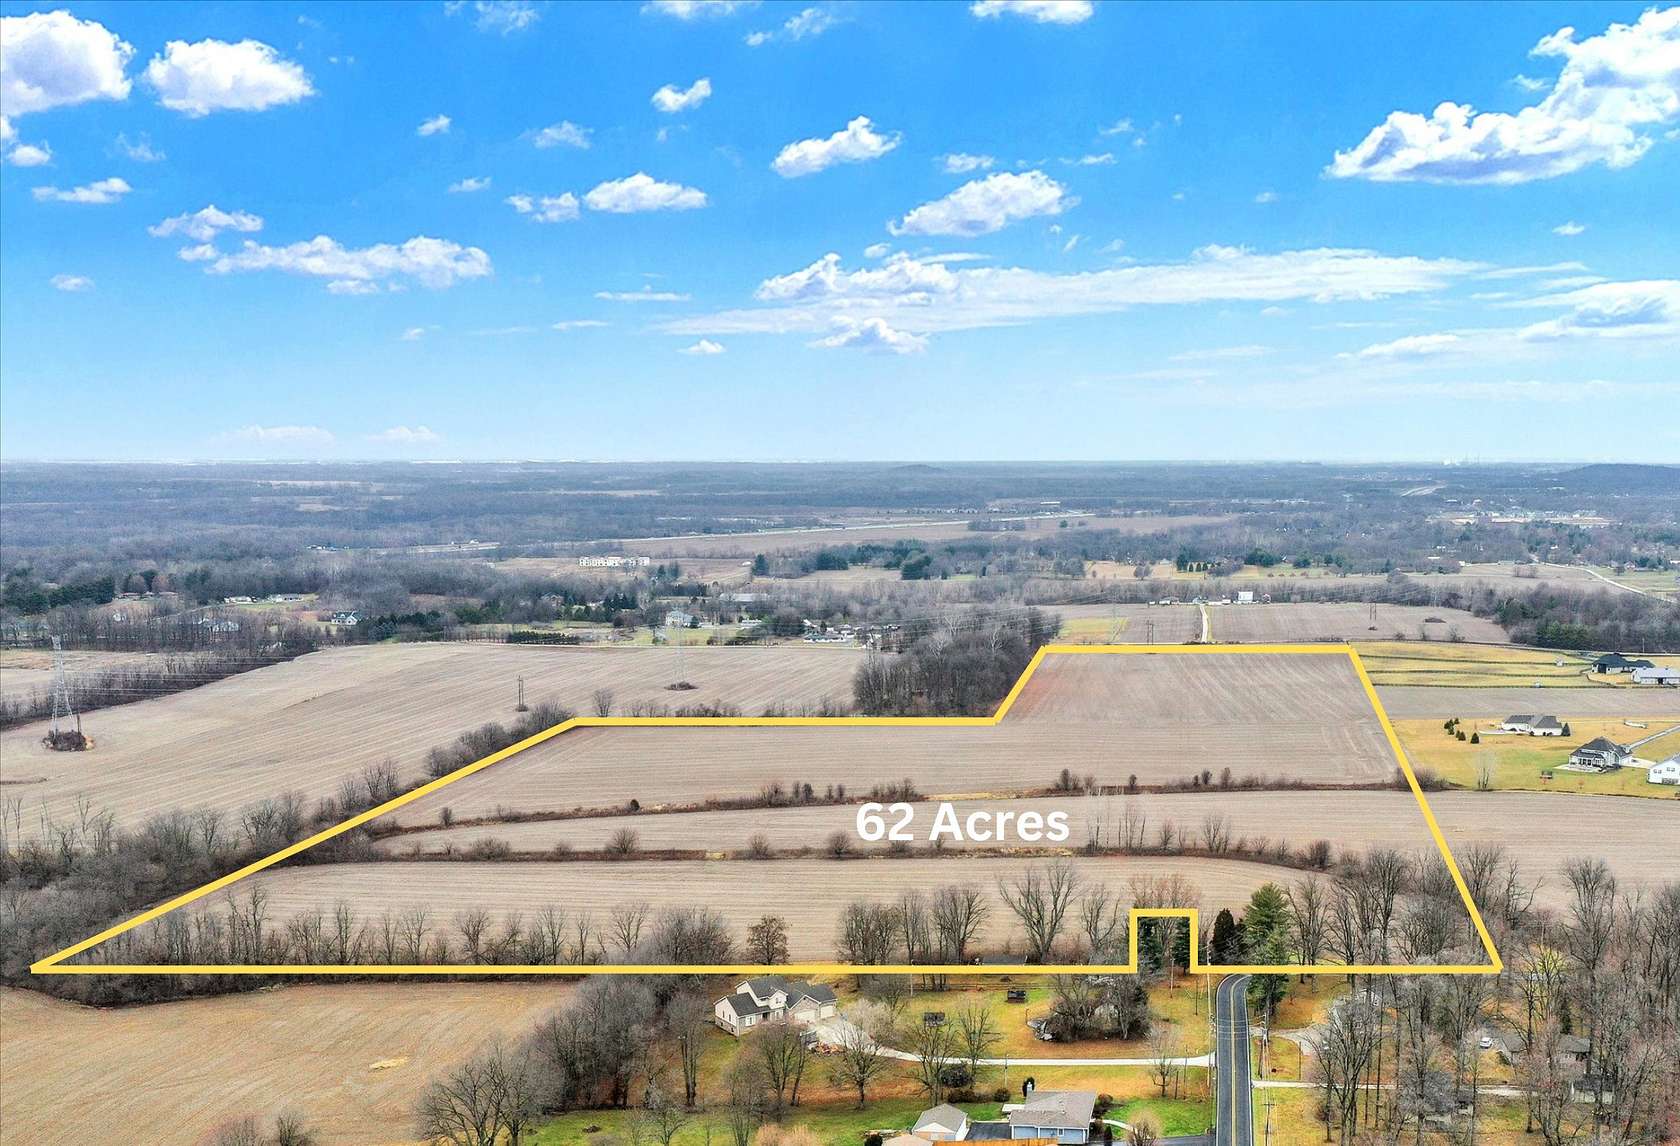 76.6 Acres of Agricultural Land for Sale in Greenwood, Indiana